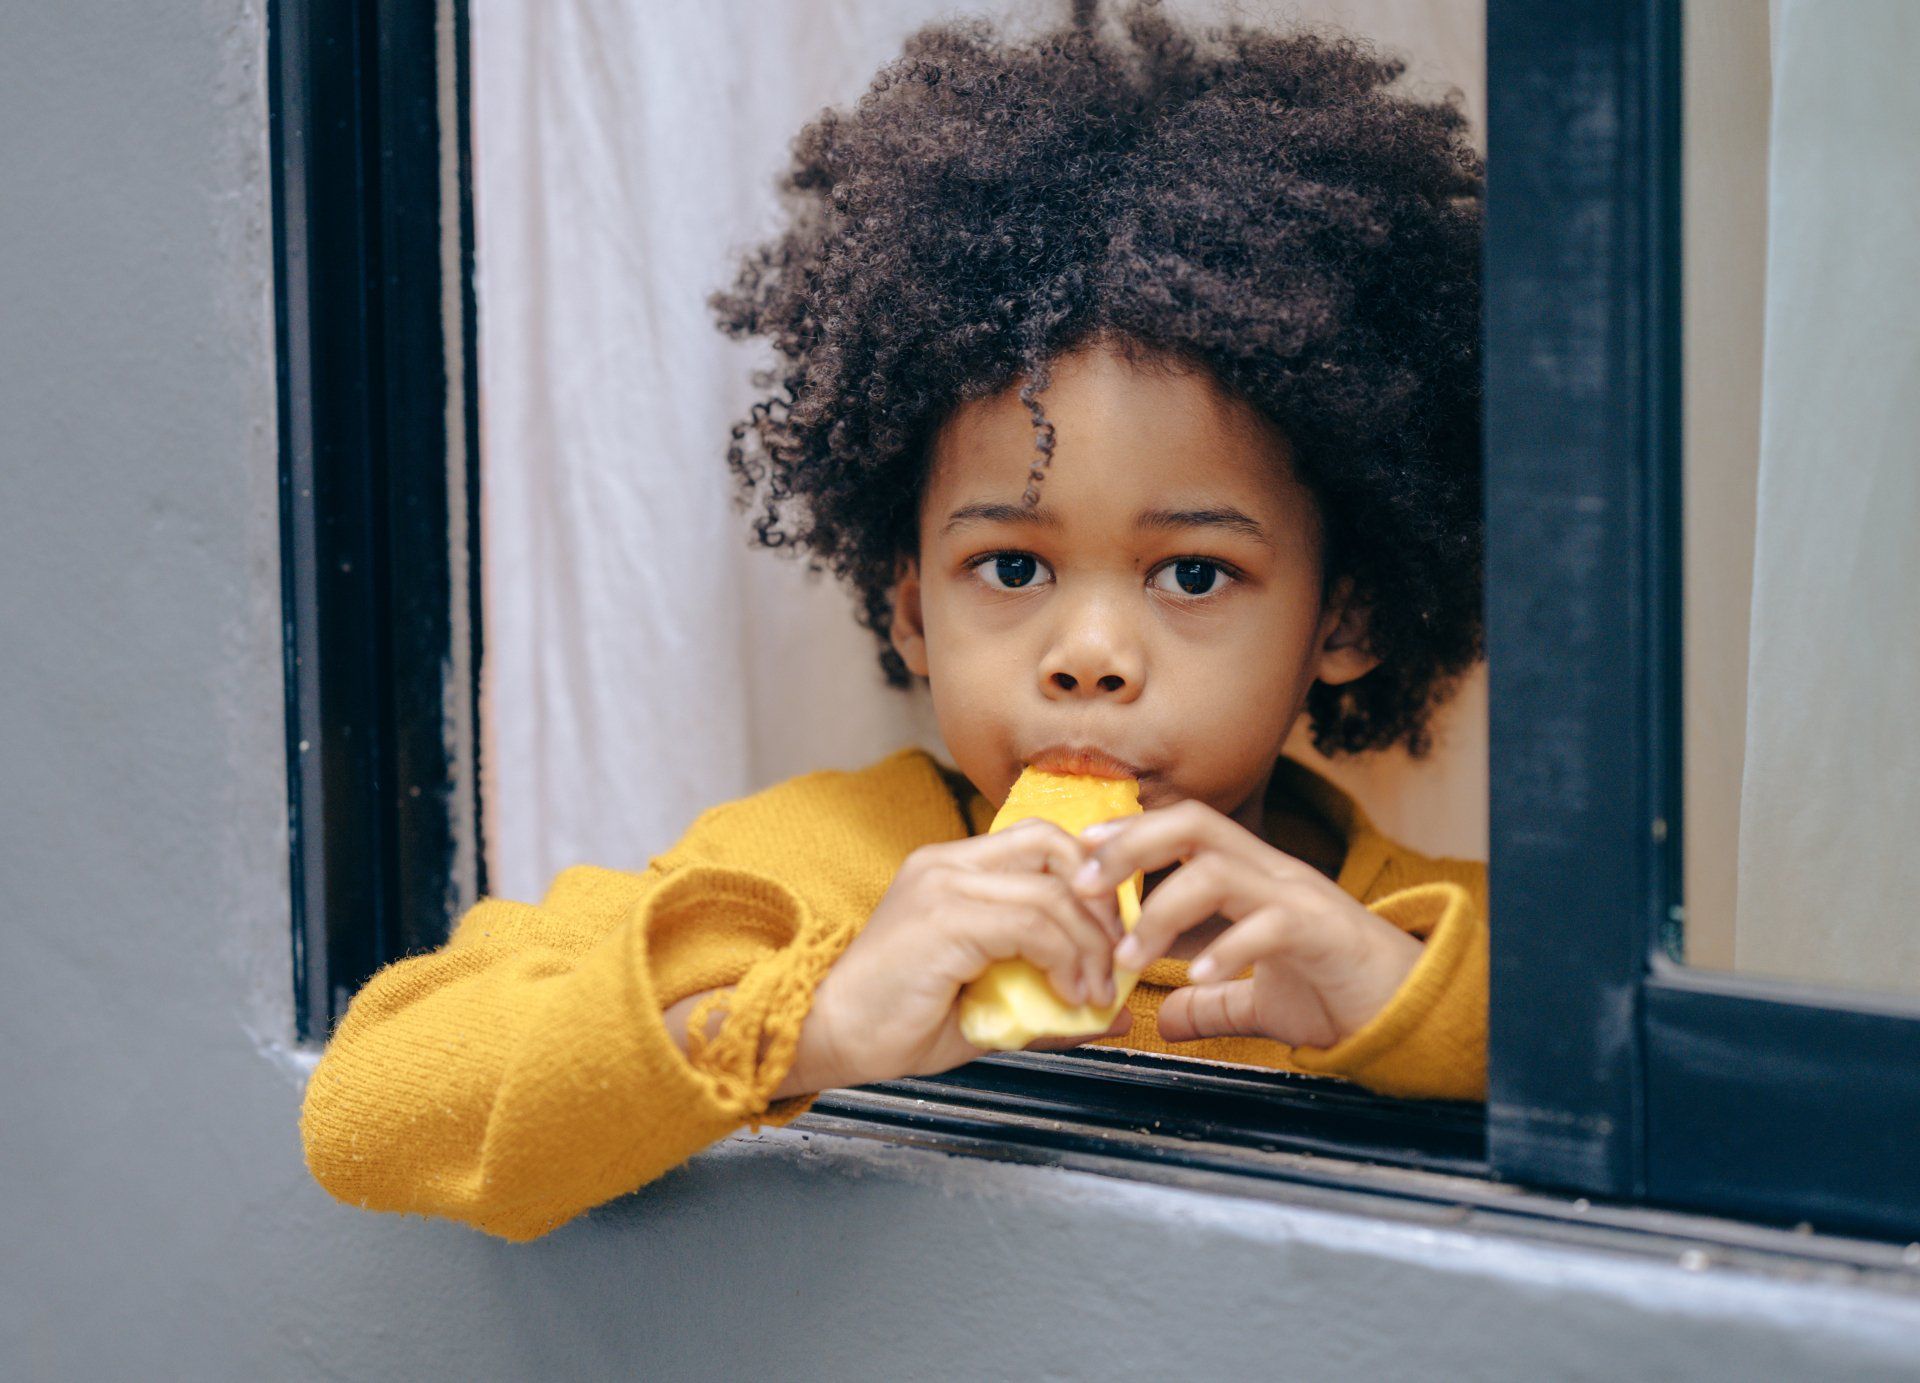 A young boy is eating a piece of cheese while looking out of a window.